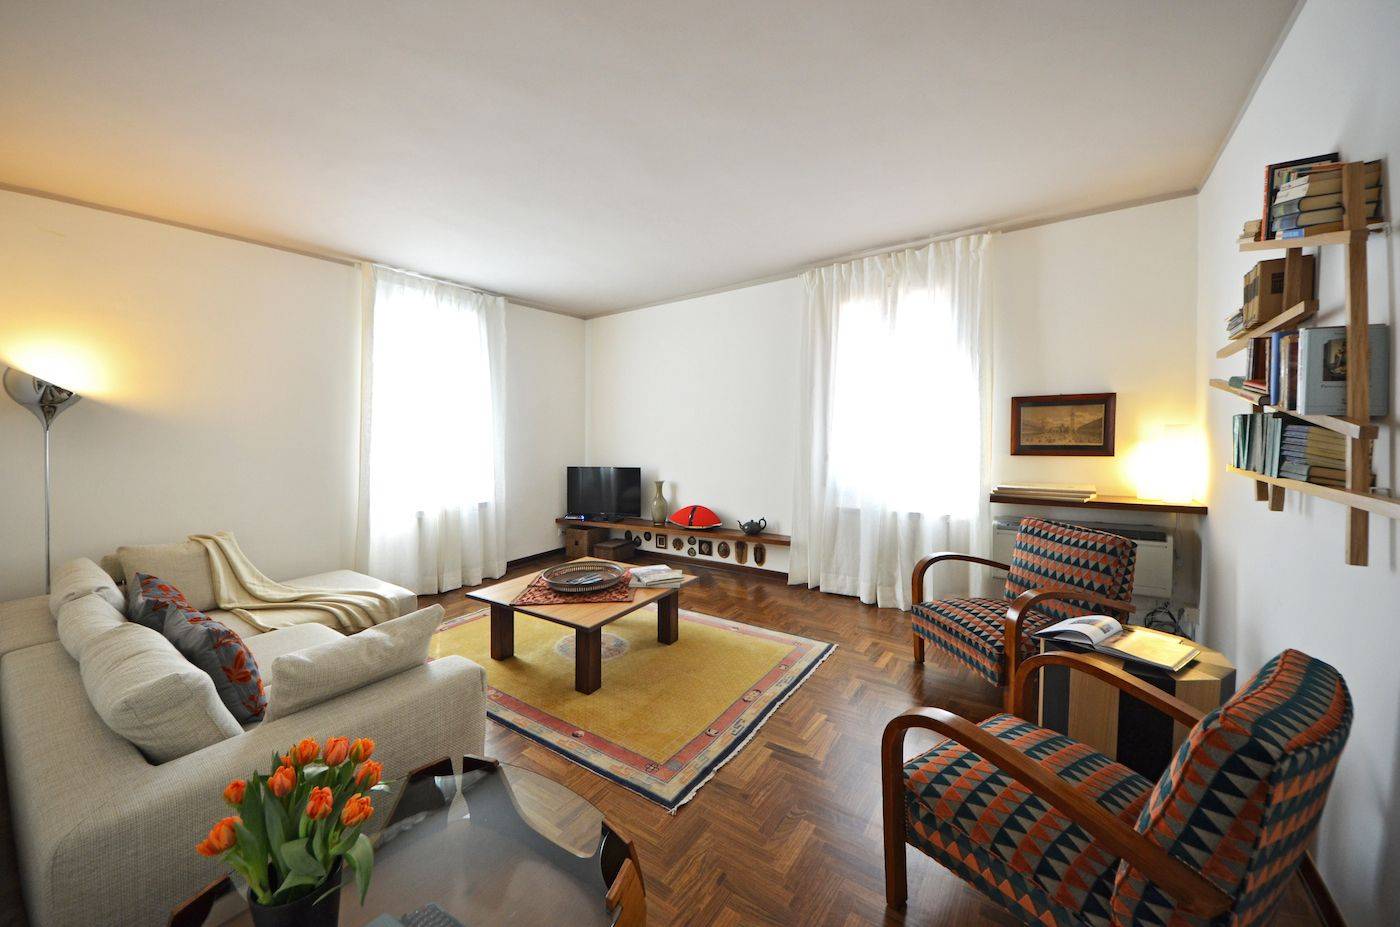 the bright and welcoming living room of the Sansovino apartment